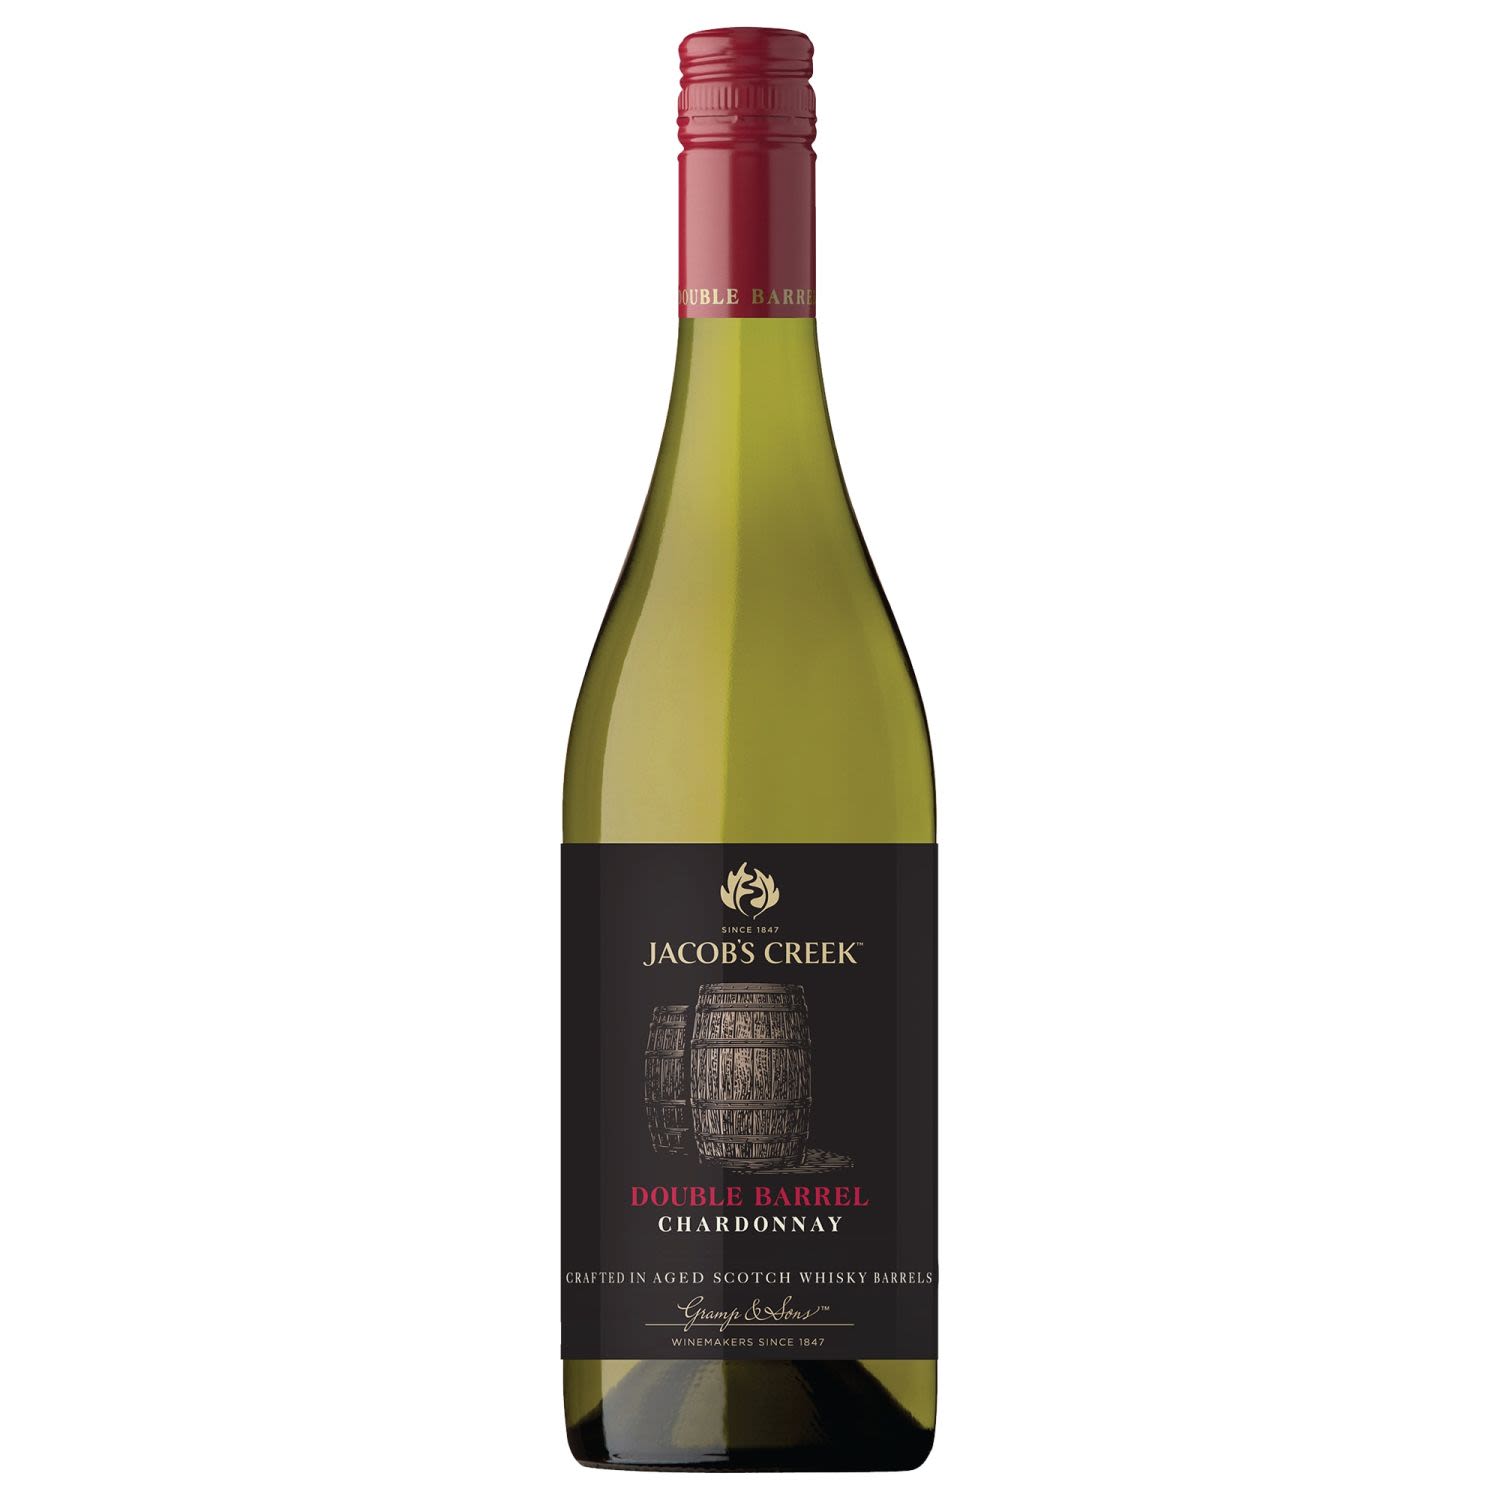 Crisp, fresh, textural; crafting this modern Australian chardonnay in aged Scotch Whisky barrels adds depth and intensity, delivering a Chardonnay that’s unlike any other.<br /> <br />Alcohol Volume: 13.60%<br /><br />Pack Format: Bottle<br /><br />Standard Drinks: 8.1</br /><br />Pack Type: Bottle<br /><br />Country of Origin: Australia<br /><br />Region: South Australia<br /><br />Vintage: Vintages Vary<br />